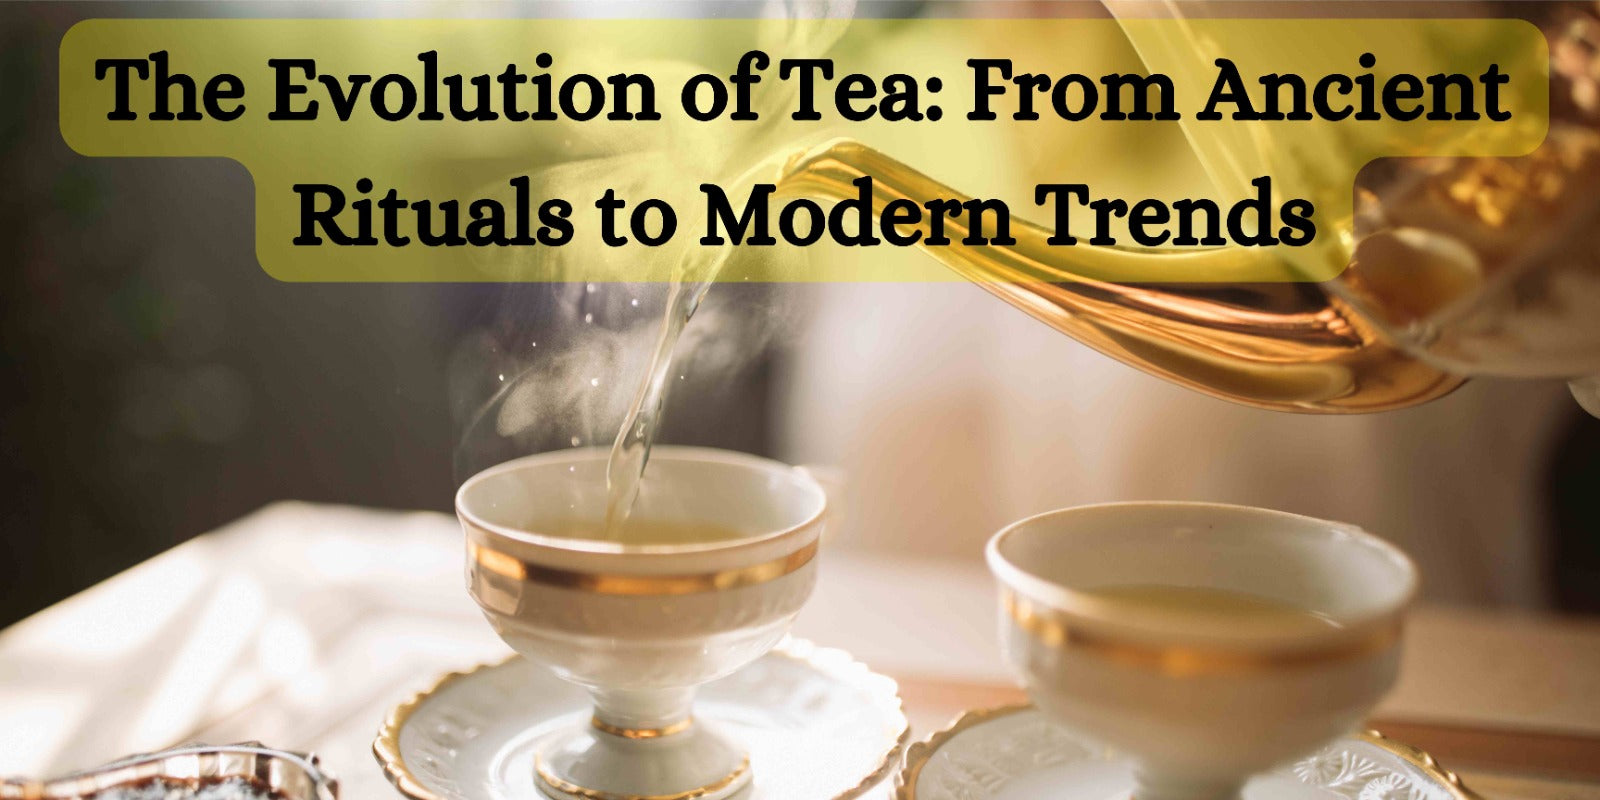 The Evolution of Tea: From Ancient Rituals to Modern Trends